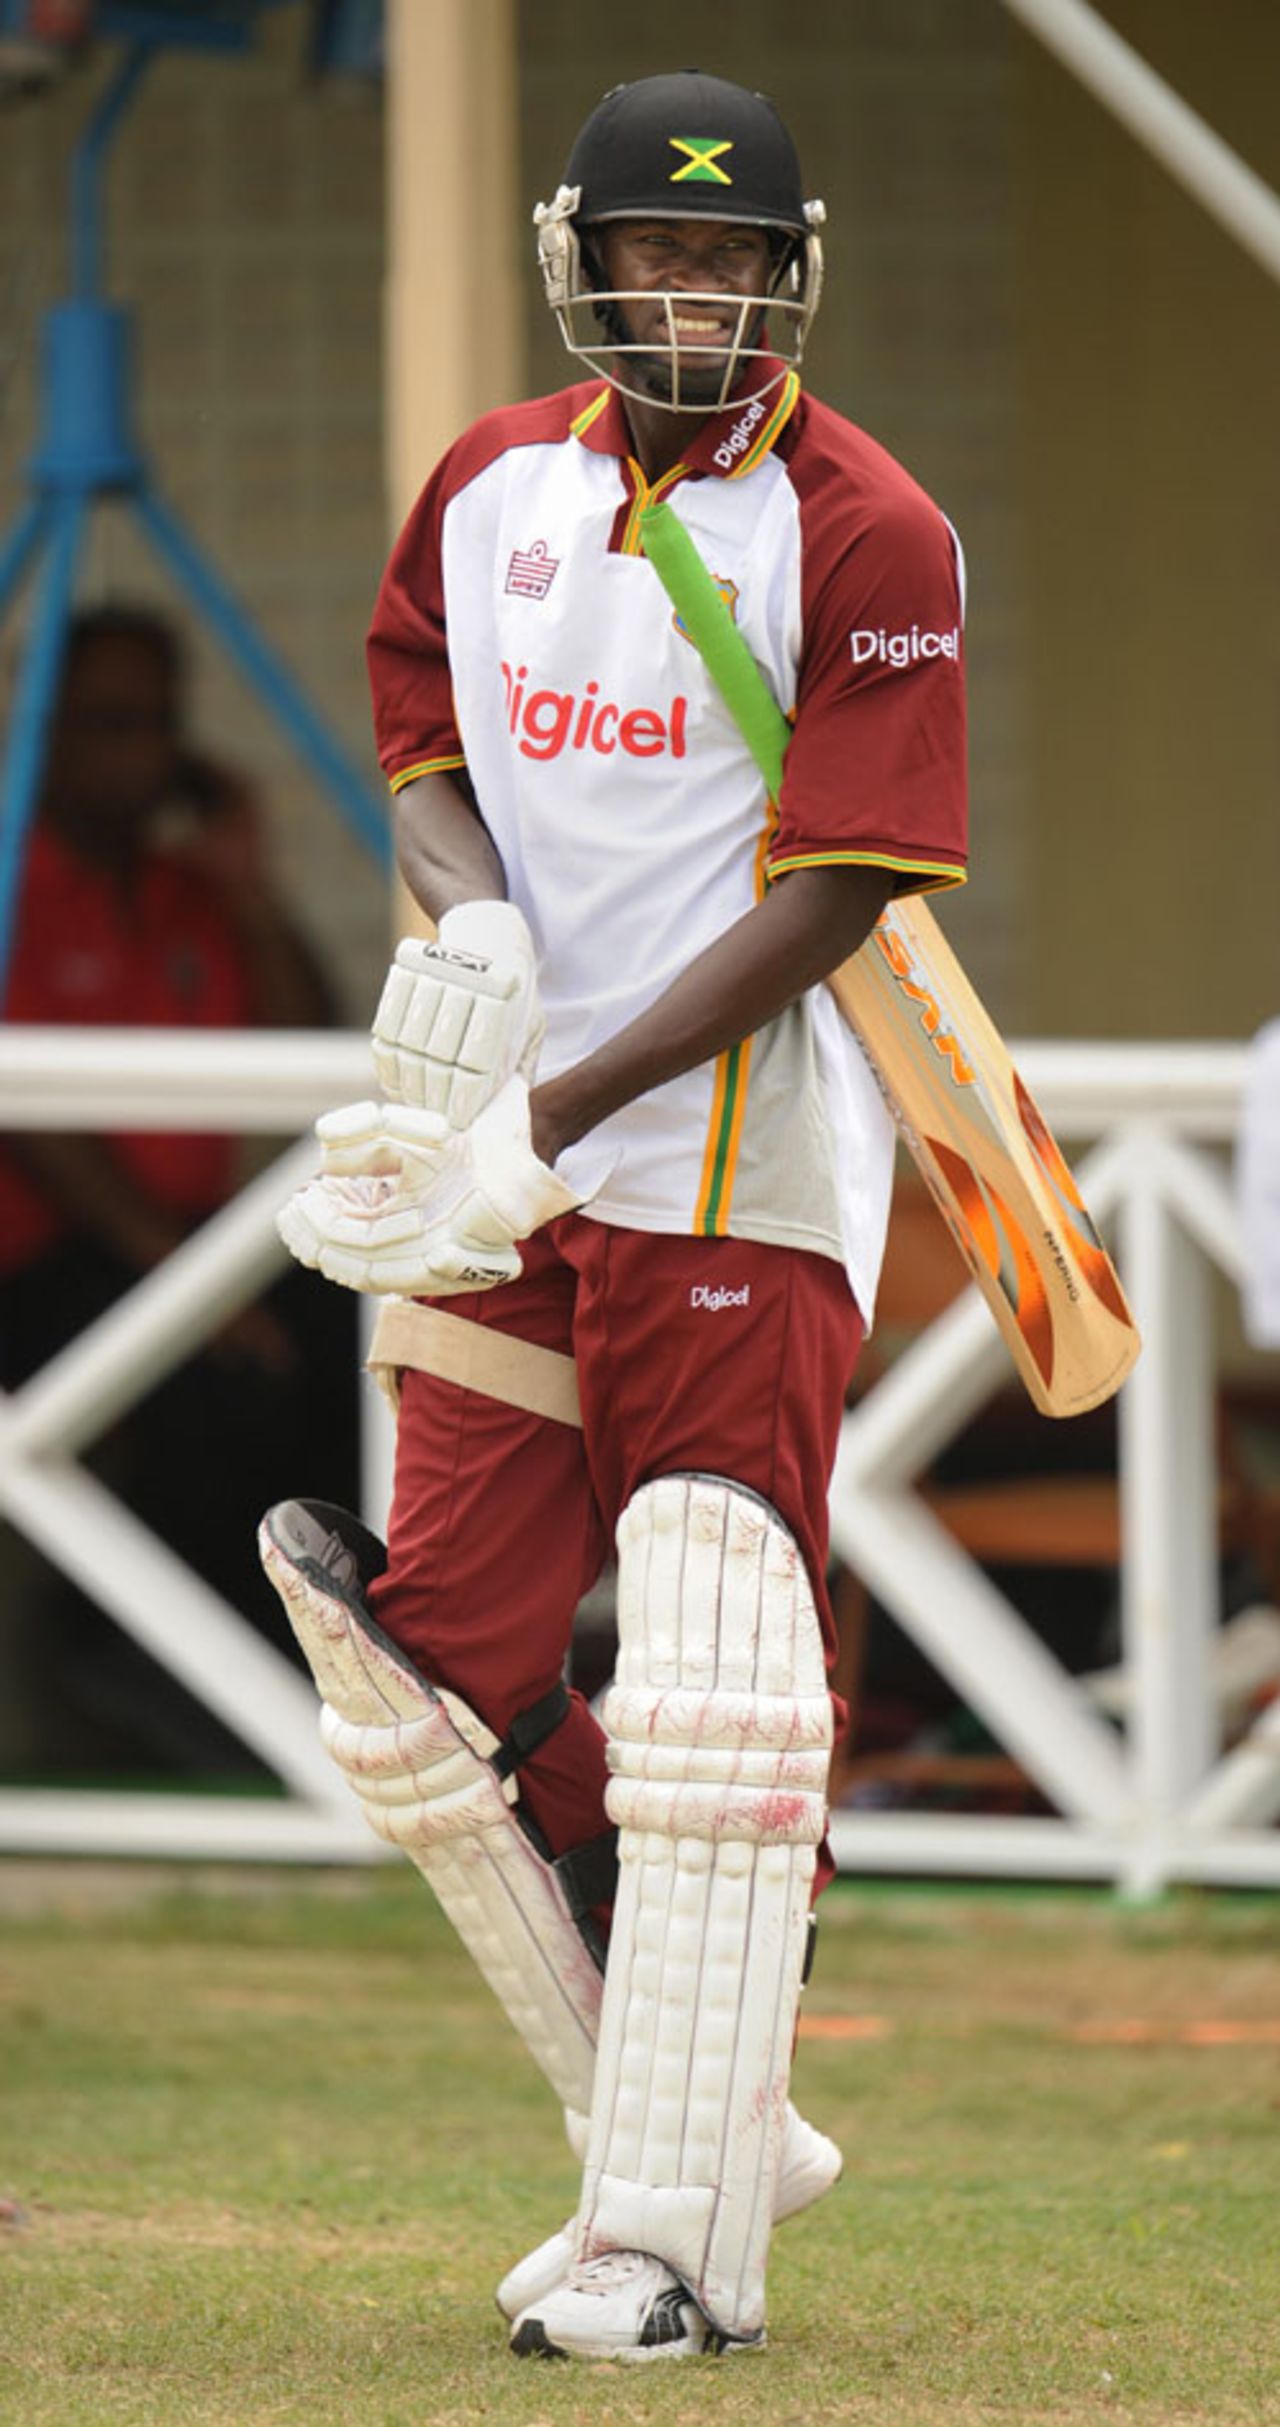 Shawn Findlay gets ready to bat in the nets in preparation for a potential ODI debut, St Kitts, July 2, 2008